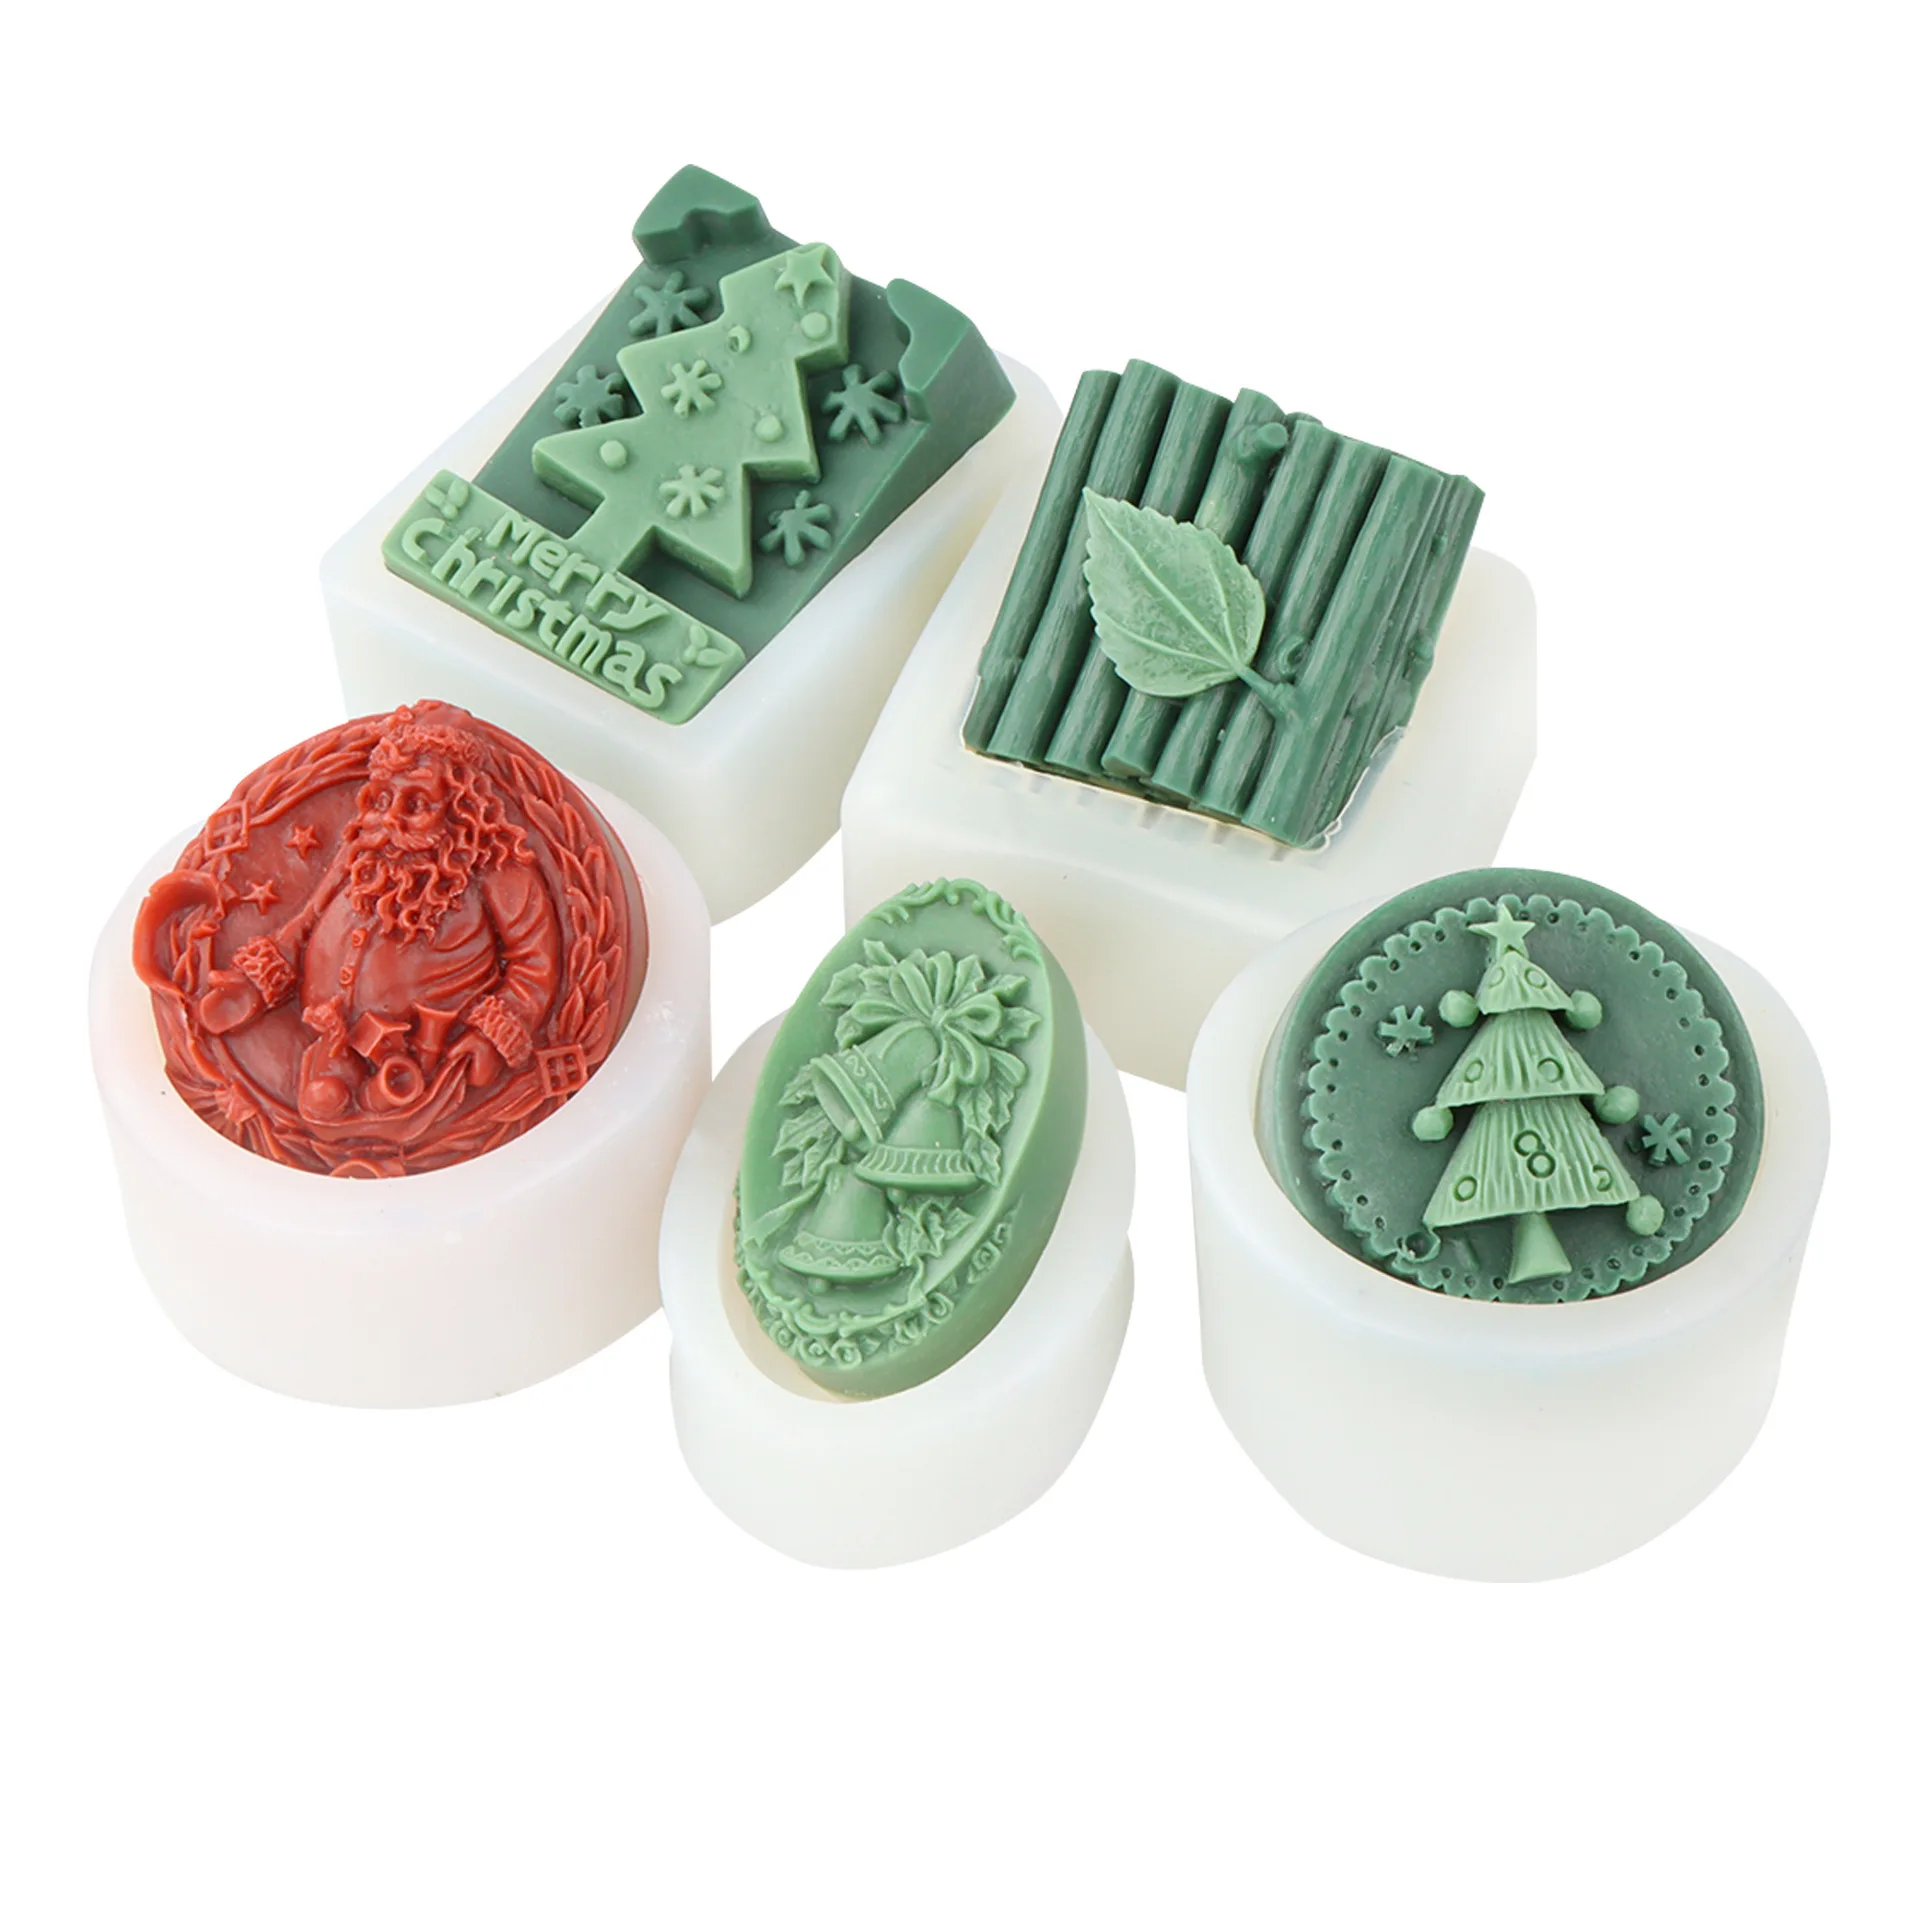 Santa Claus Elk Silicone Soap Mold DIY Christmas Tree Bell Soap Making Kits Handmade Cake Candle Mold Gifts Craft Home Decor images - 6